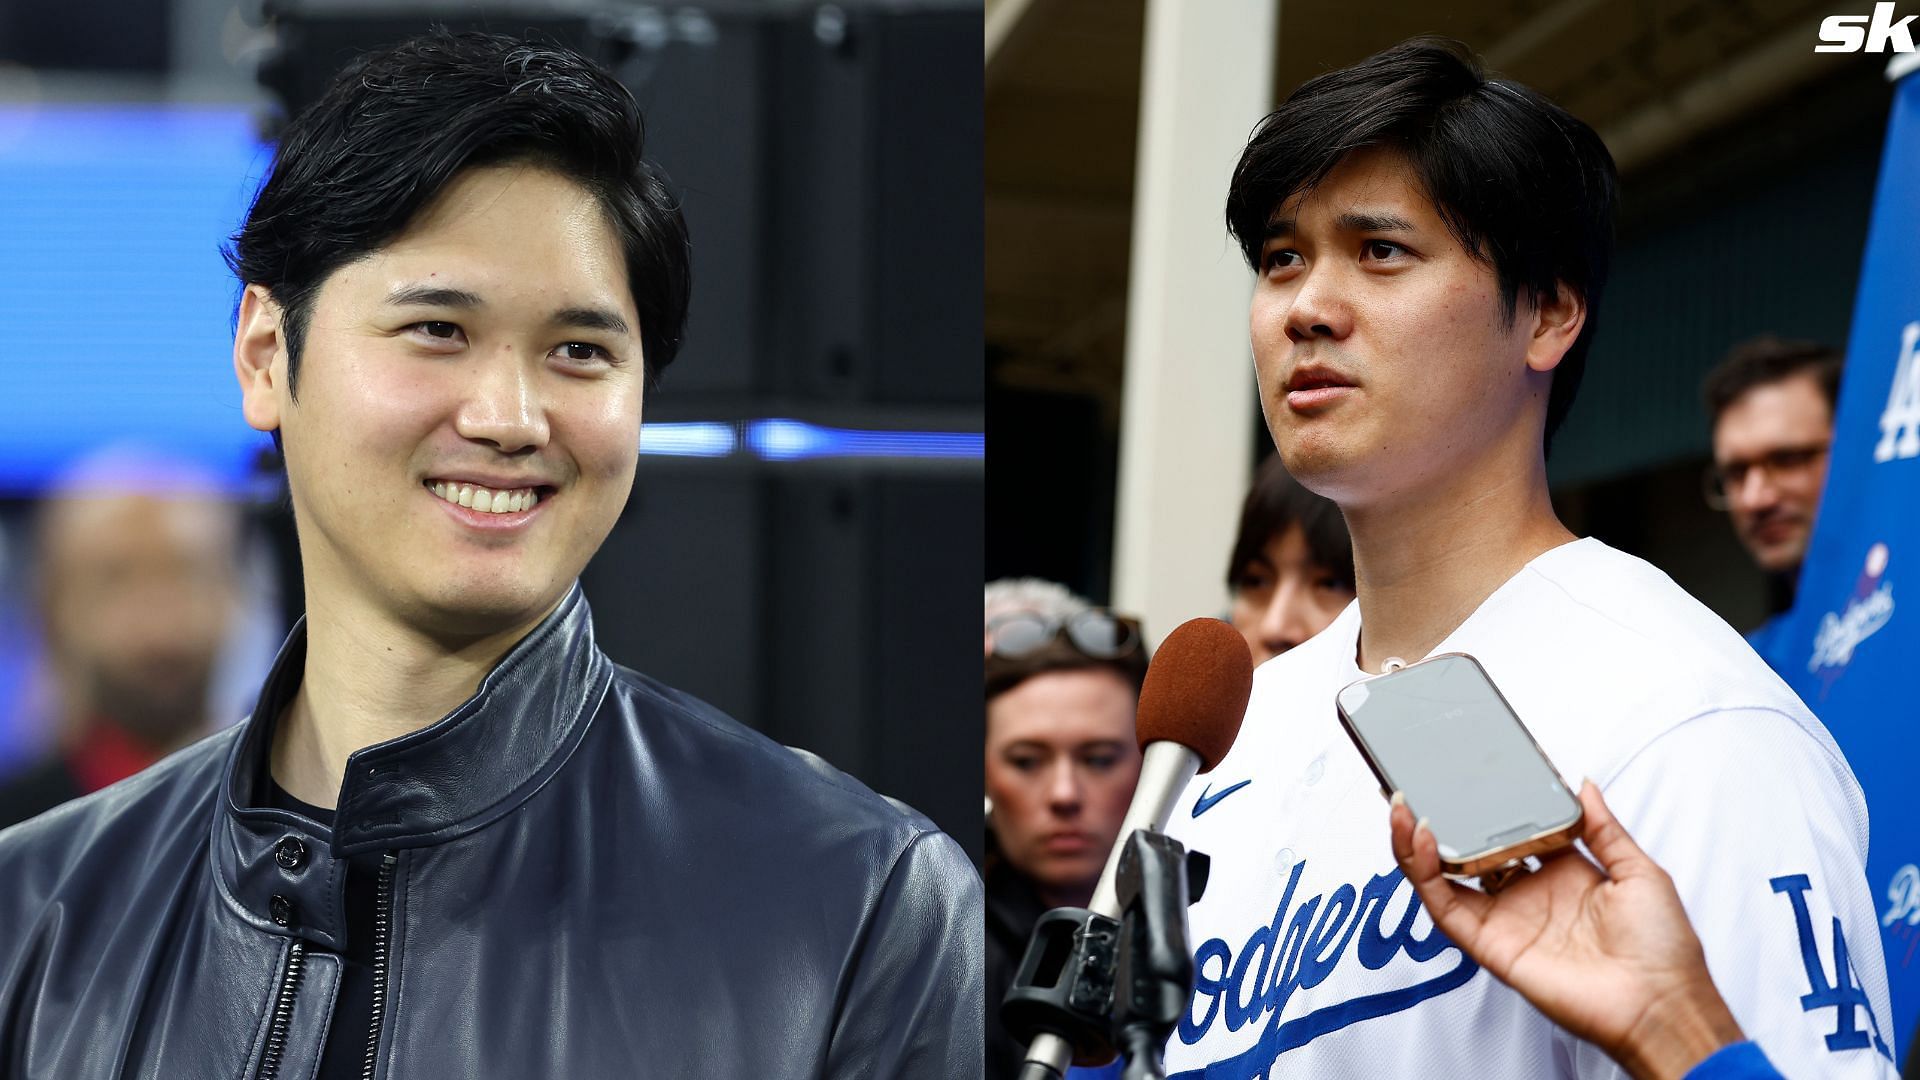 Shohei Ohtani of the Los Angeles Dodgers speaks with the media during DodgerFest at Dodger Stadium